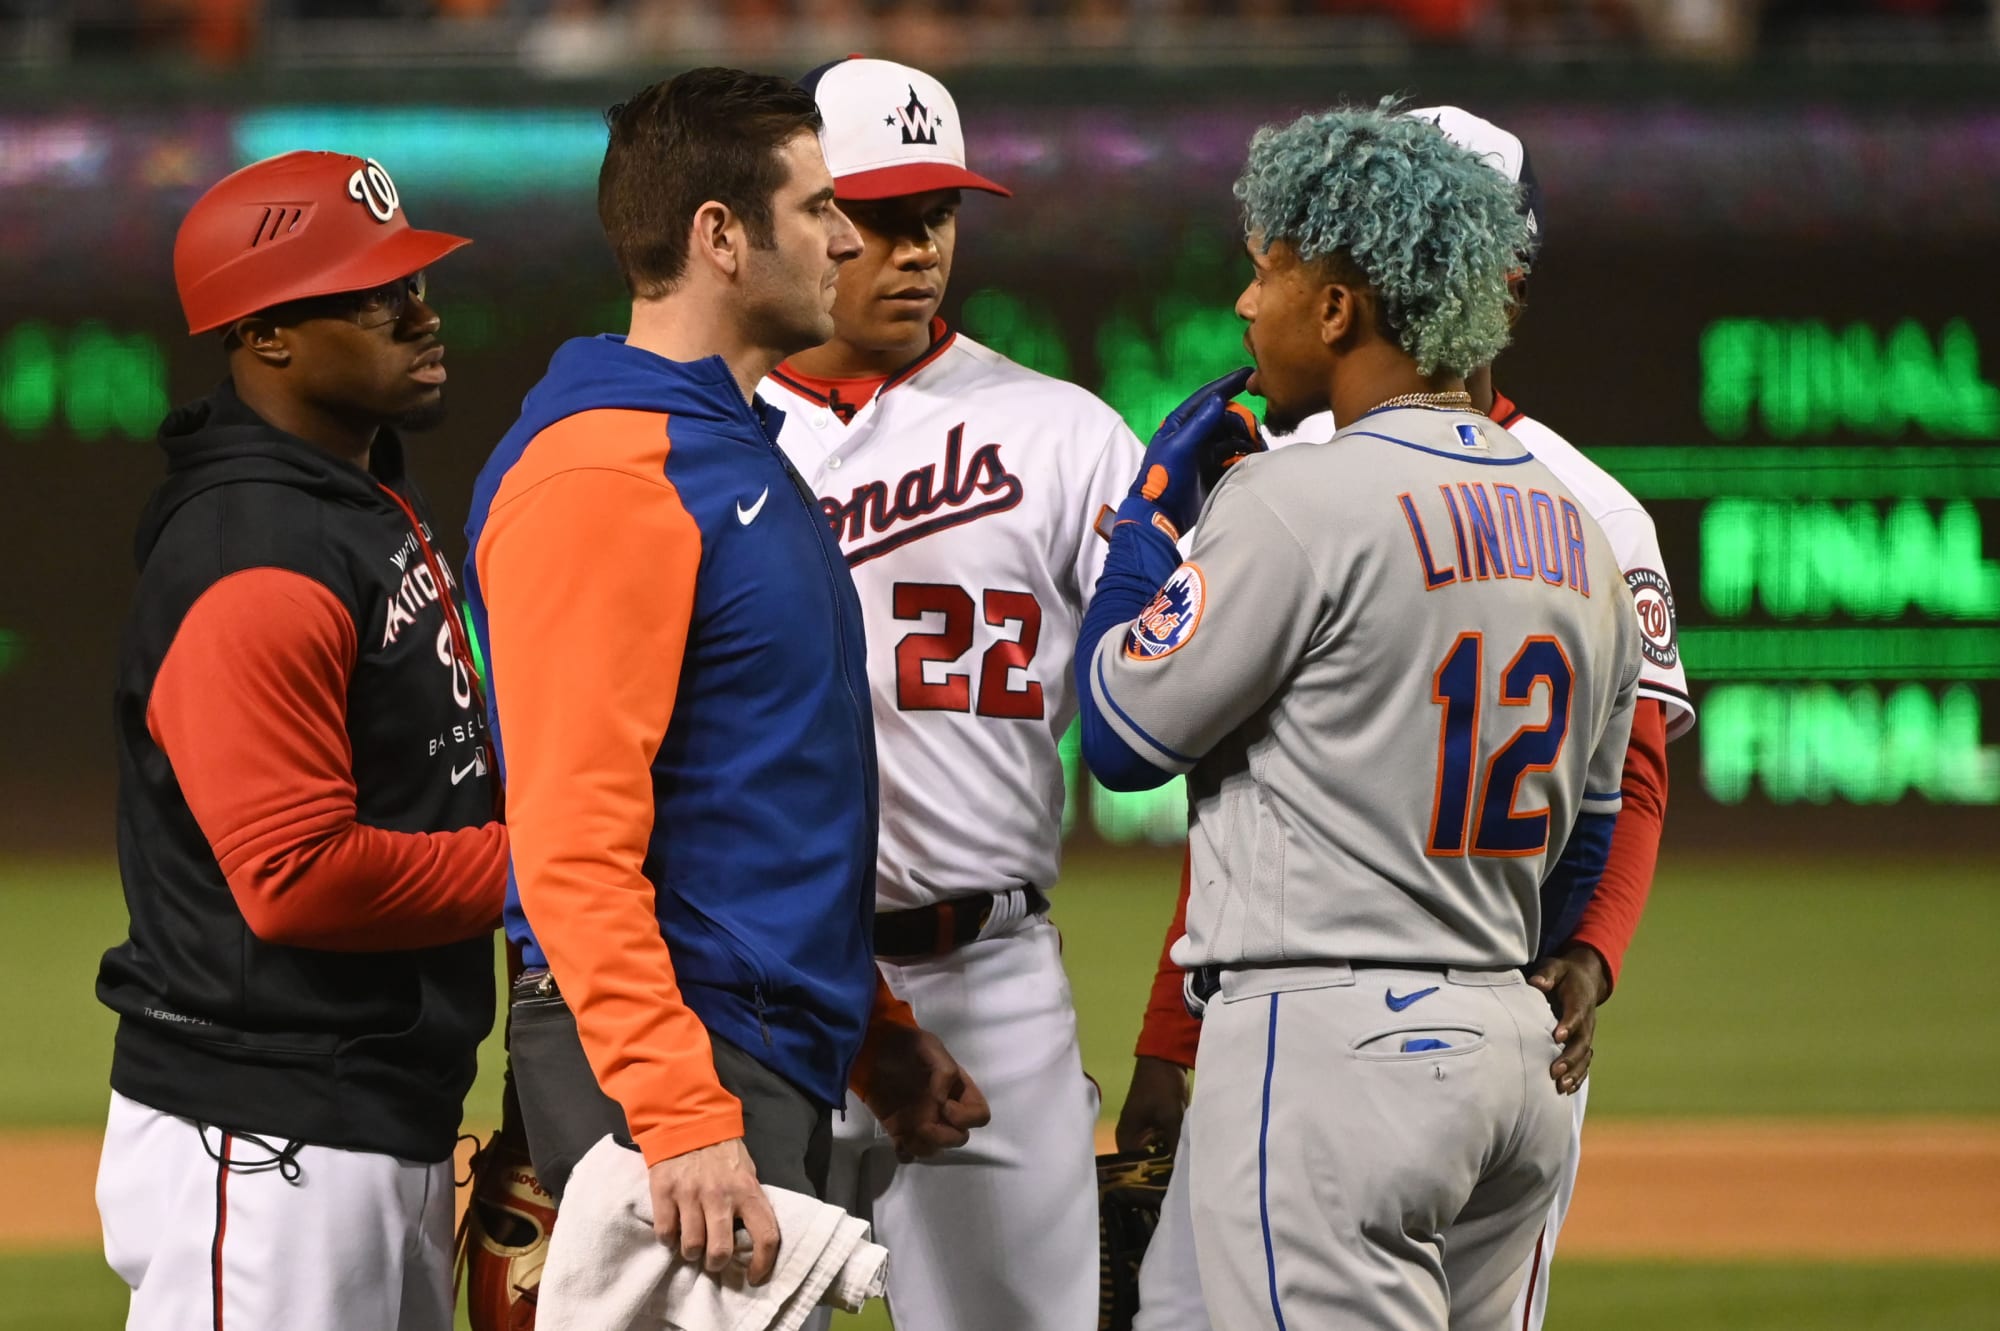 Mets vs Nationals brawl: Who will be suspended? - Paper ...